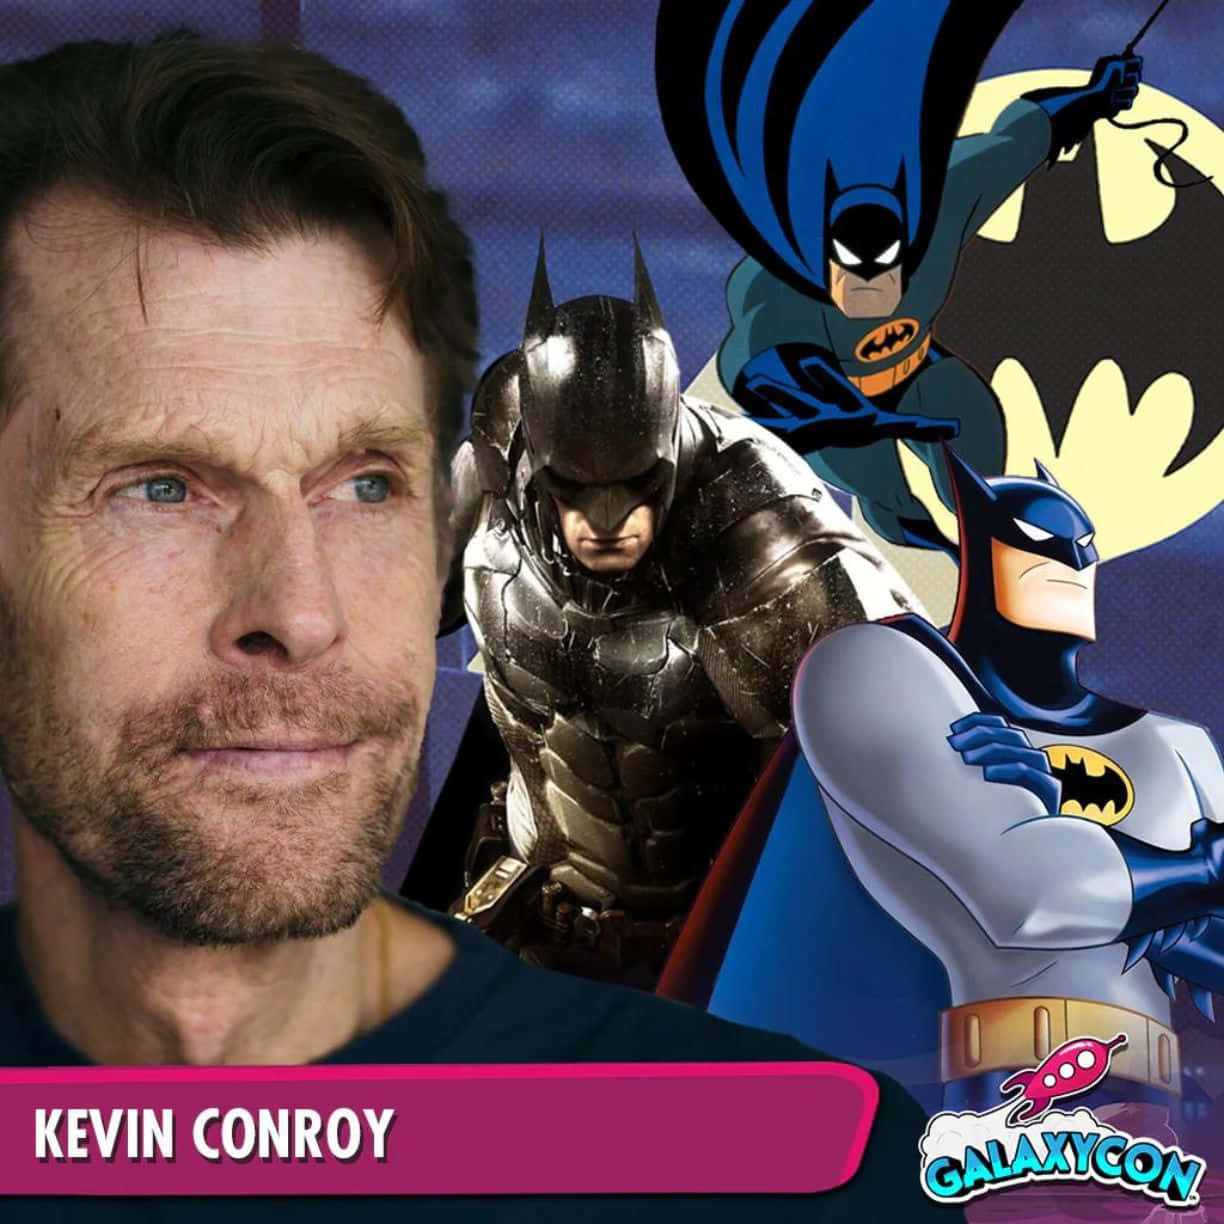 Kevin Conroy striking a pose in a suit Wallpaper